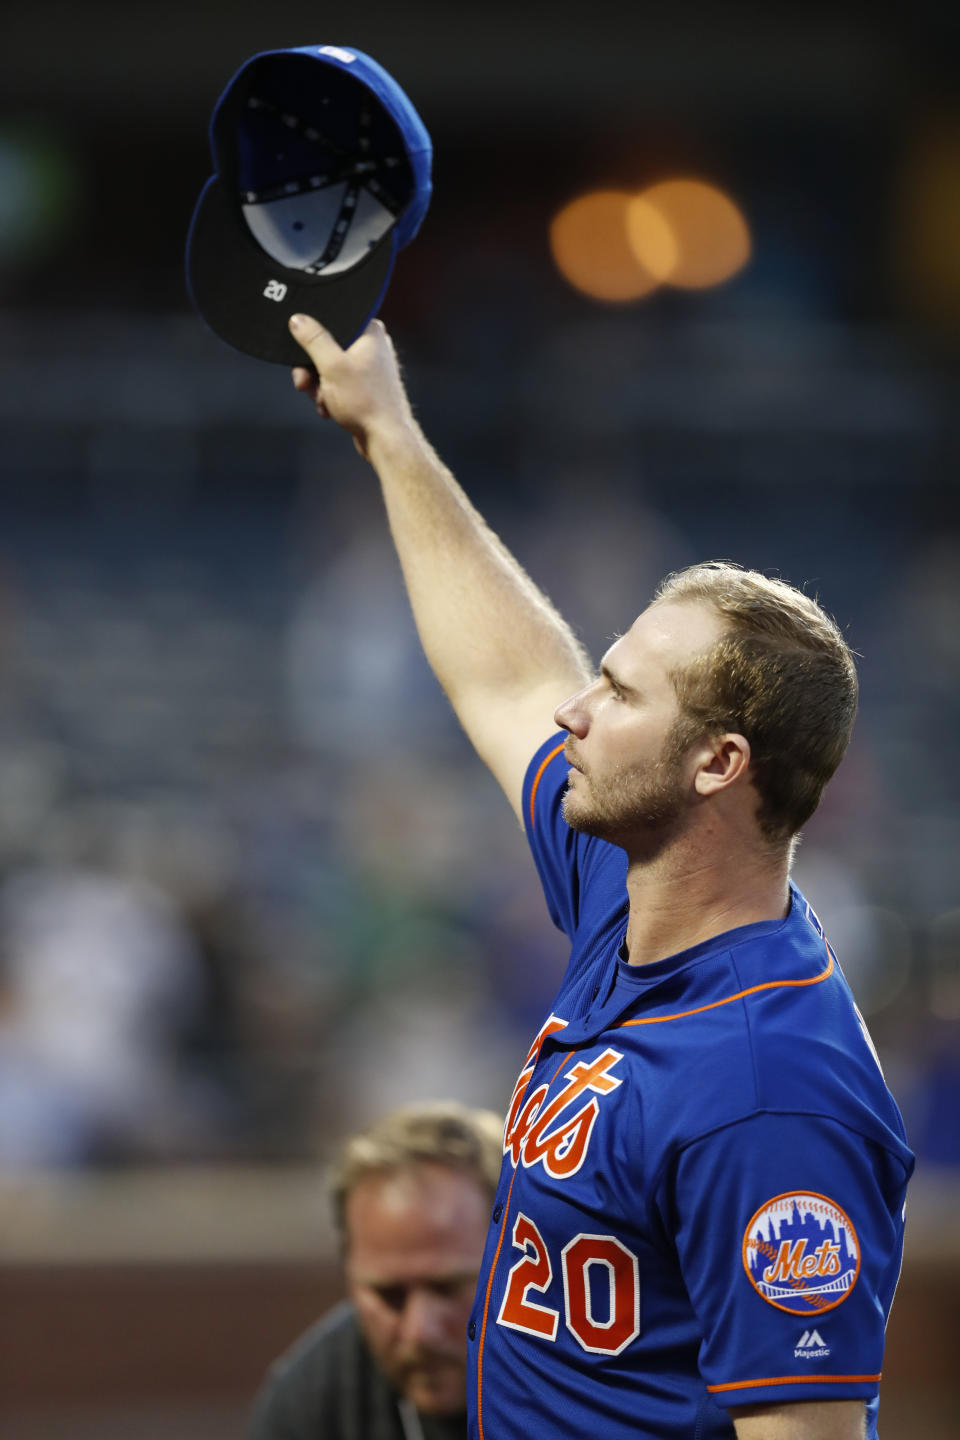 New York Mets' Pete Alonso, who set the MLB rookie home run record after surpassing the Yankees' Aaron Judge, waves to the crowd after he was removed from the Mets final baseball game of the season, Sunday, Sept. 29, 2019, in New York. (AP Photo/Kathy Willens)